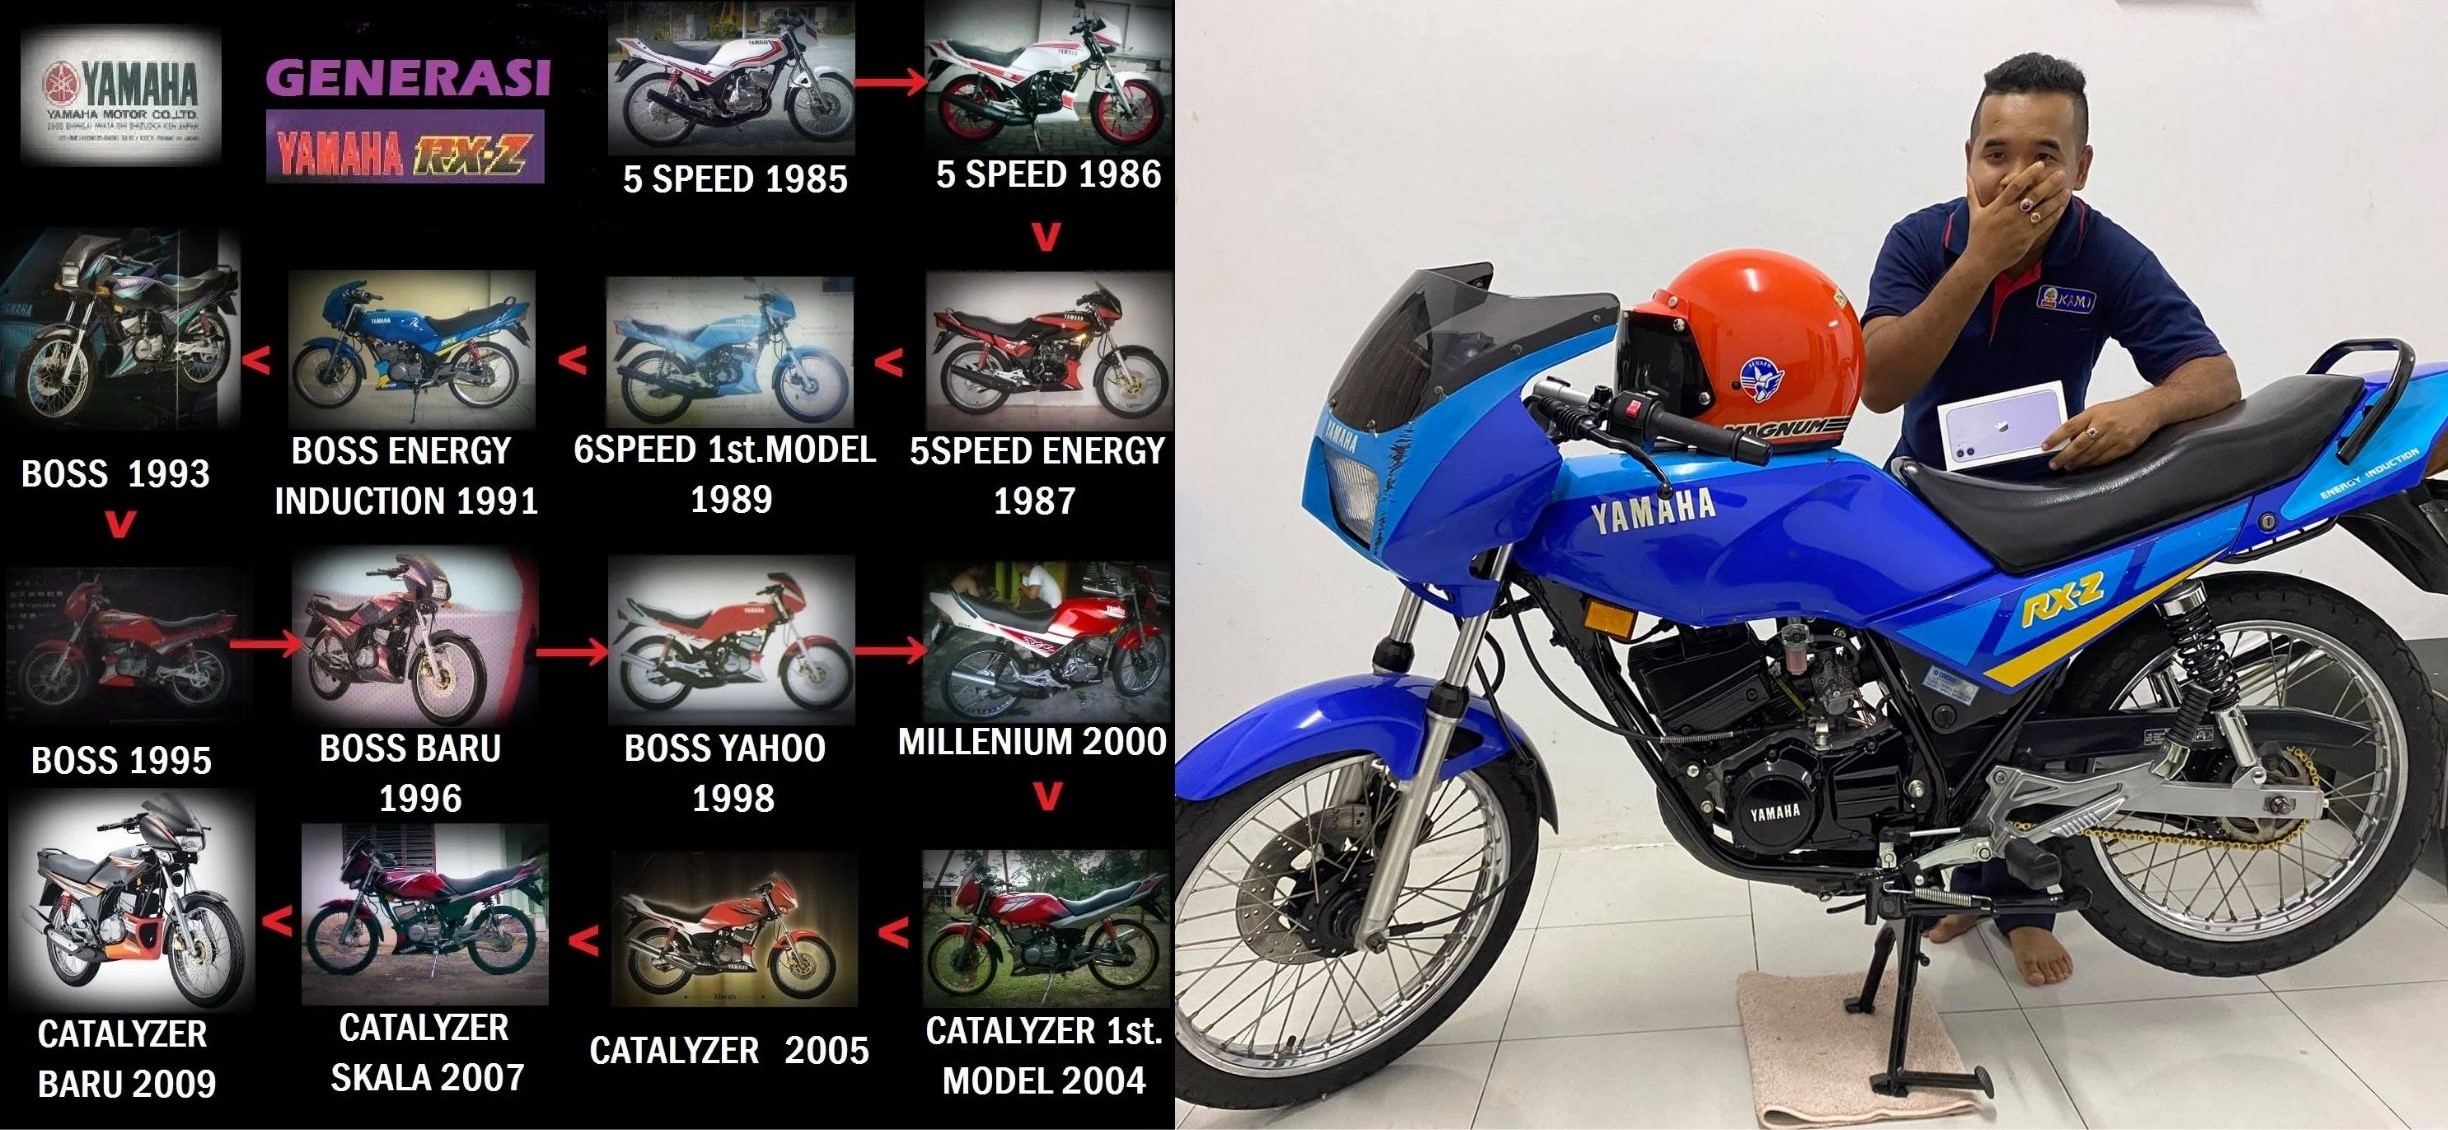 Hard to think that this bike originally cost RM8,500. Not all vehicles are a liability when you really think of it right?